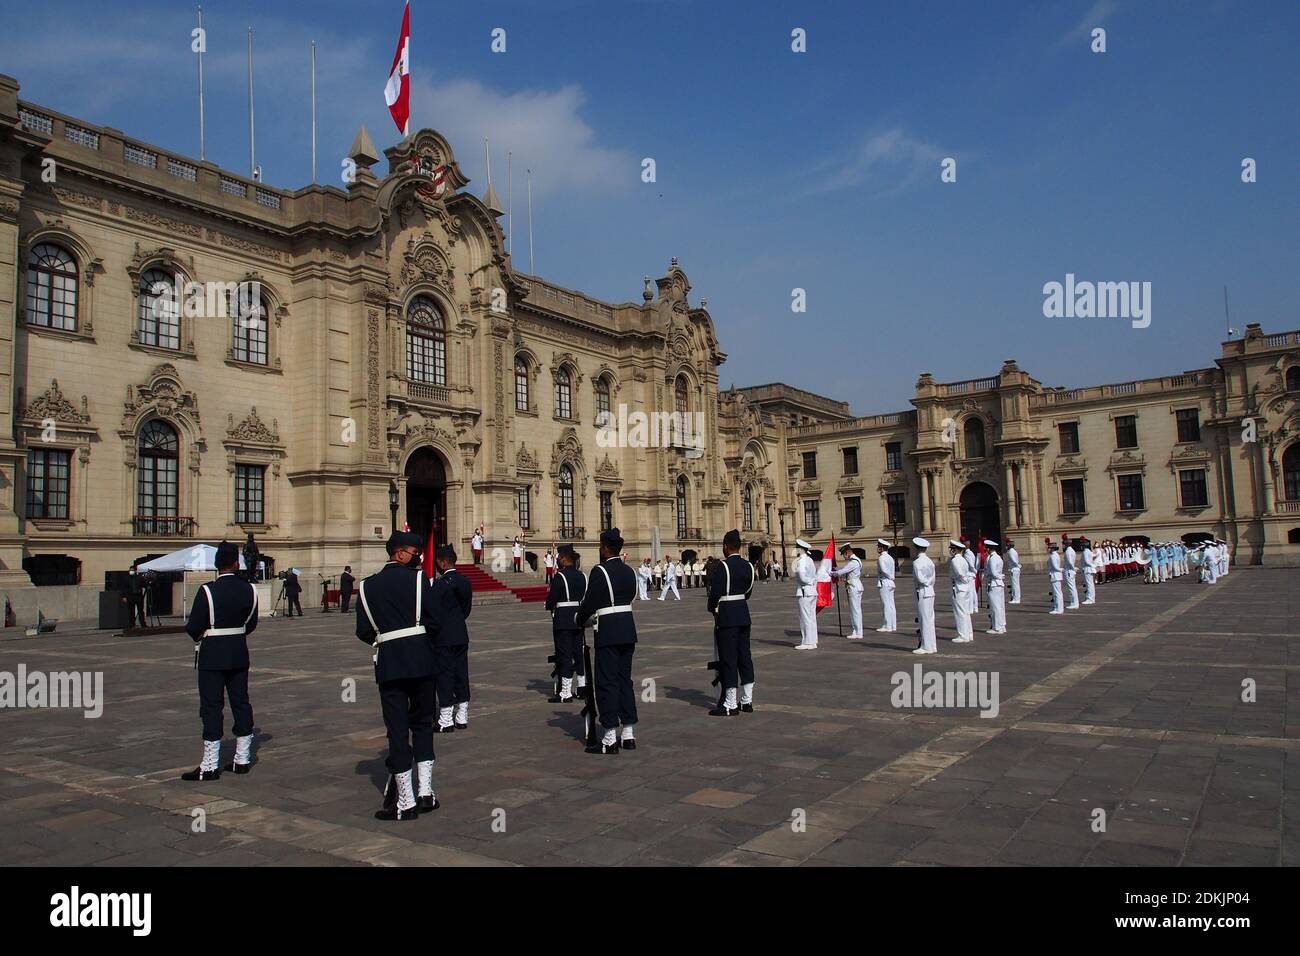 Military parade in the courtyard of the government palace at the ceremony of awarding the Sword of Honour to the officers, recently graduated, who occupied the first position of their class in the training schools of the Armed Forces. Stock Photo